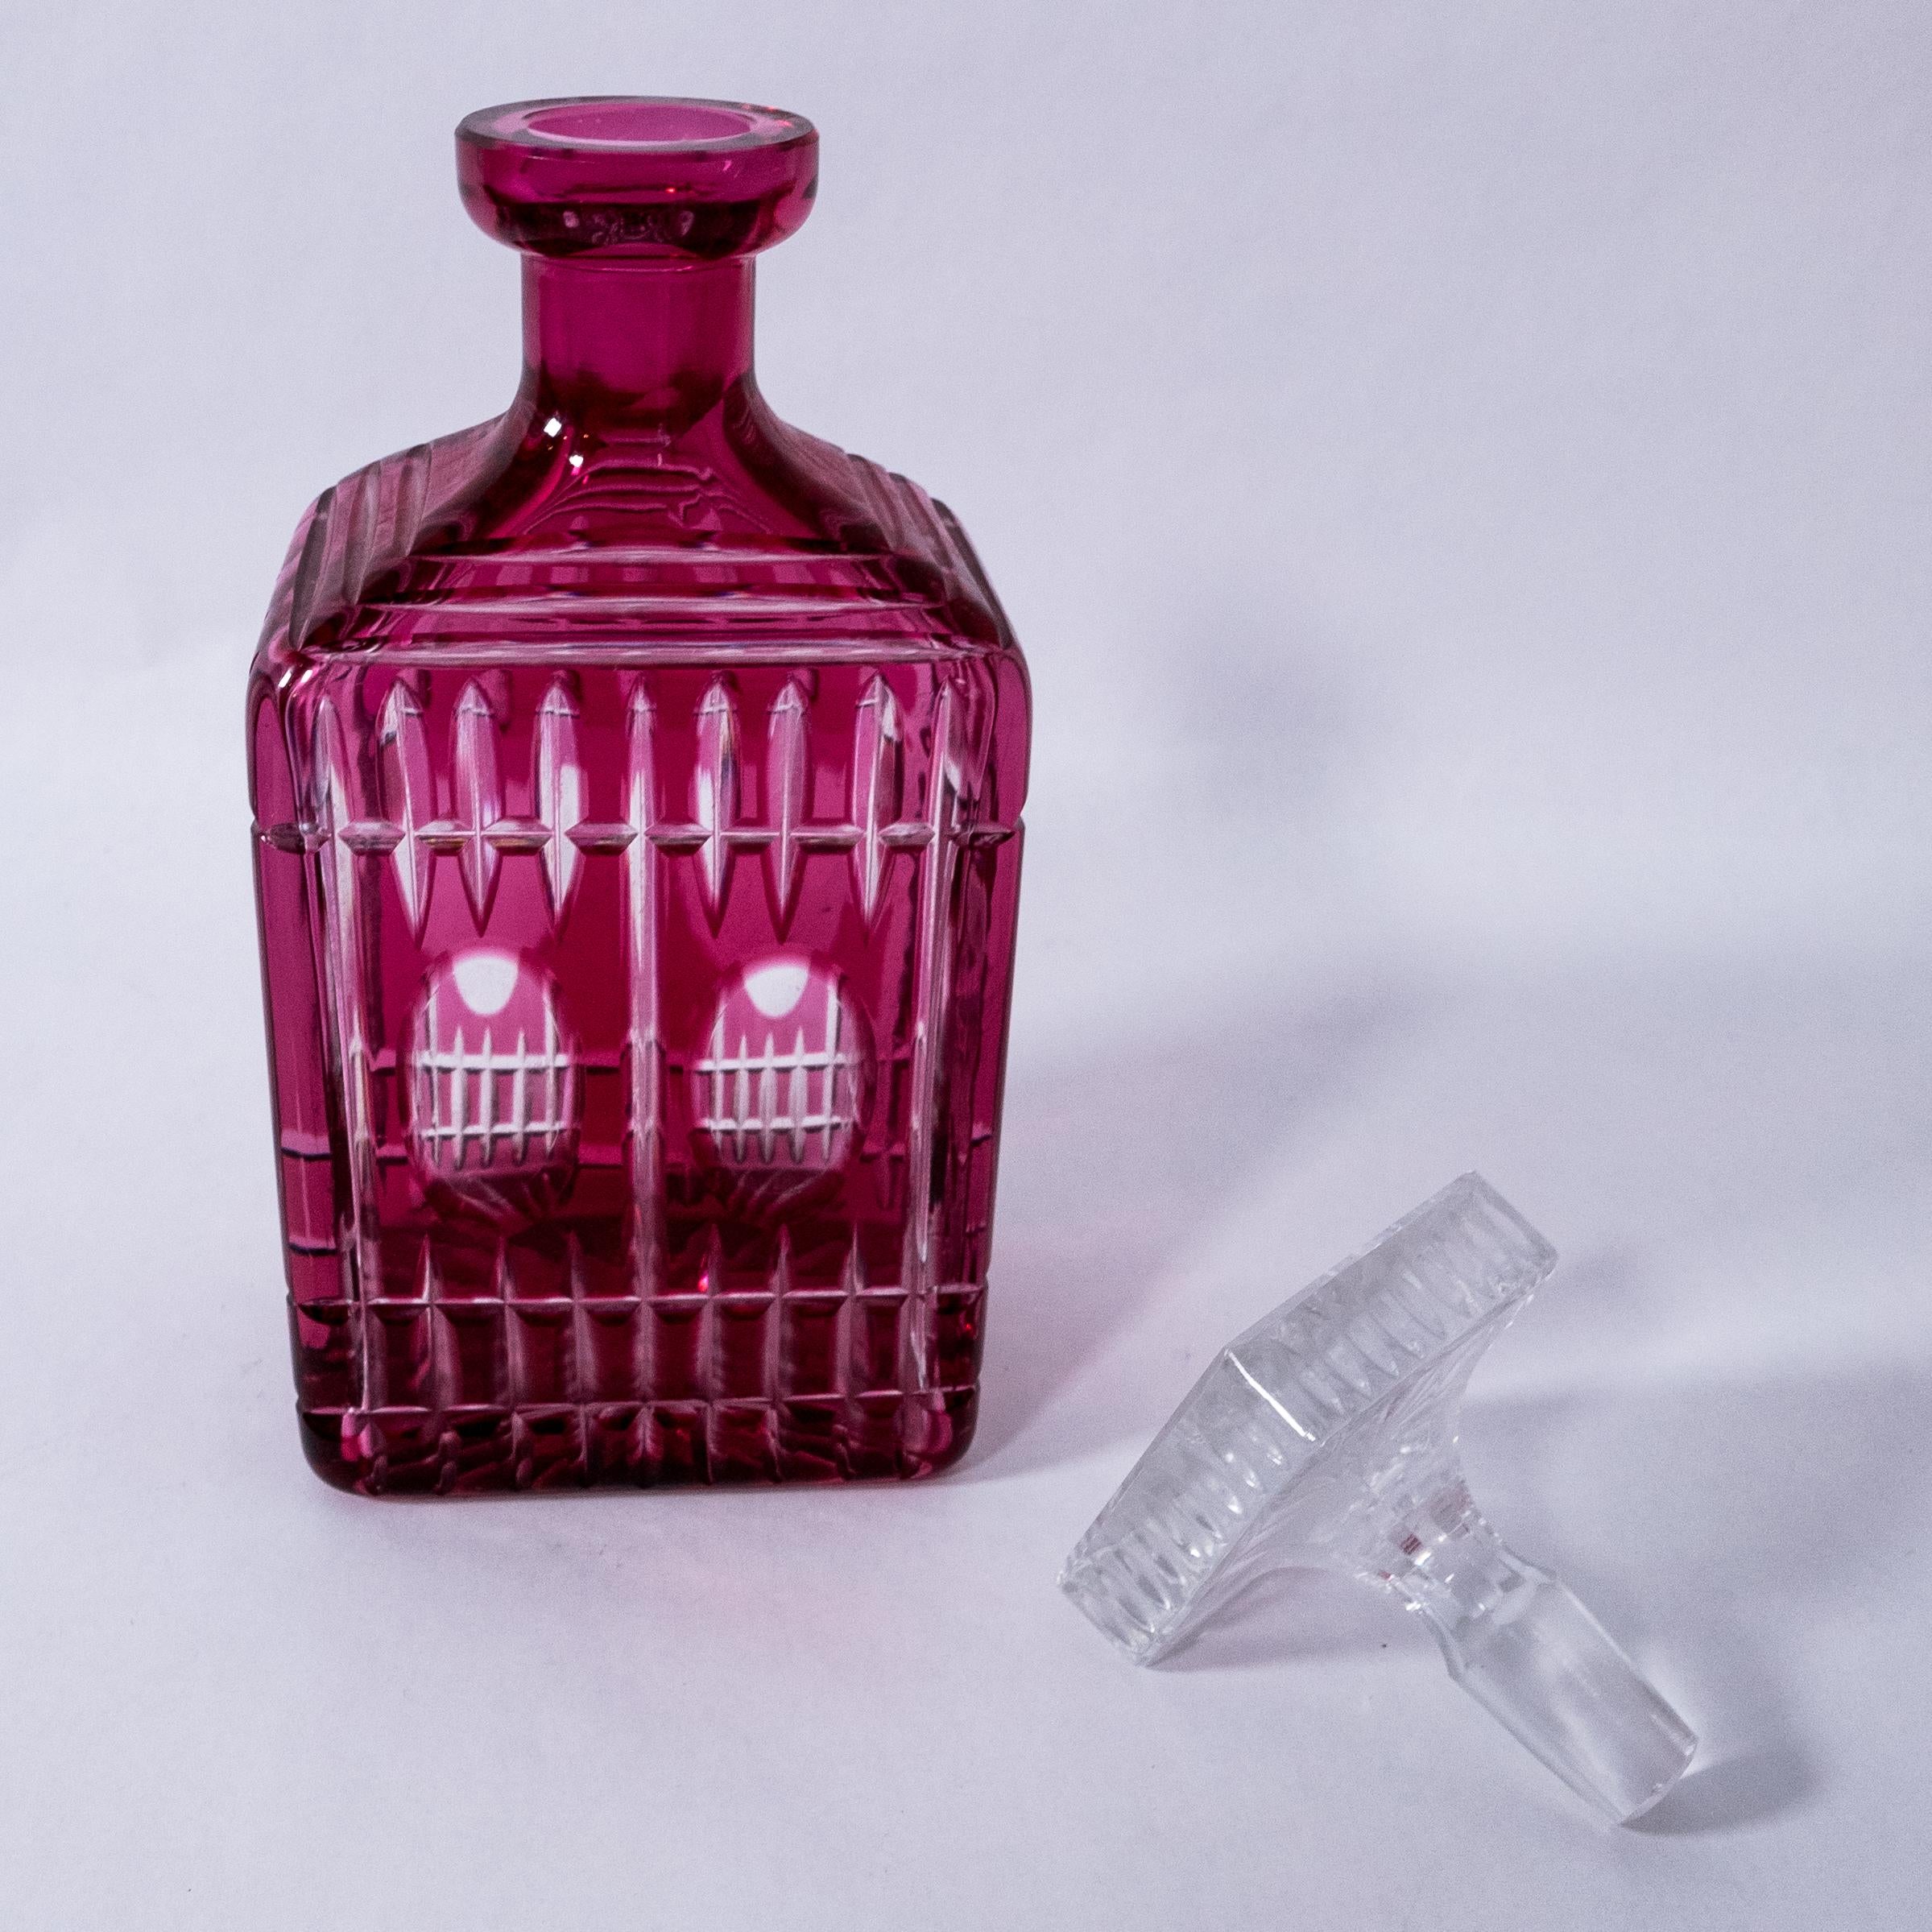 Hand-Crafted Antique English Cut Crystal Decanter, Ruby Red Color Square Stopper